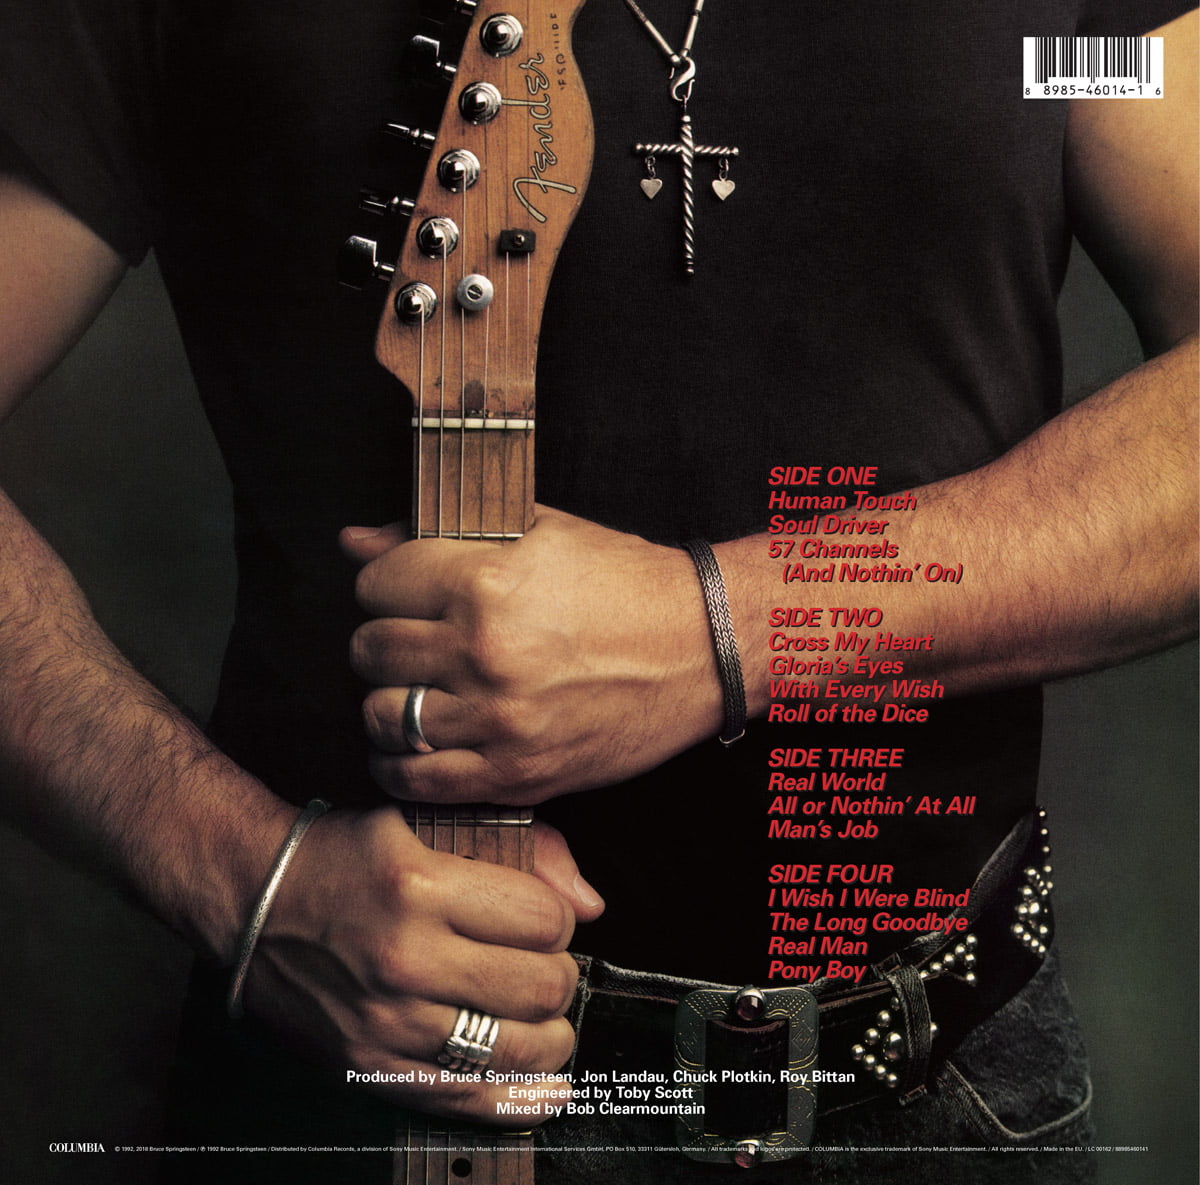 Bruce Springsteen Human Touch back cover